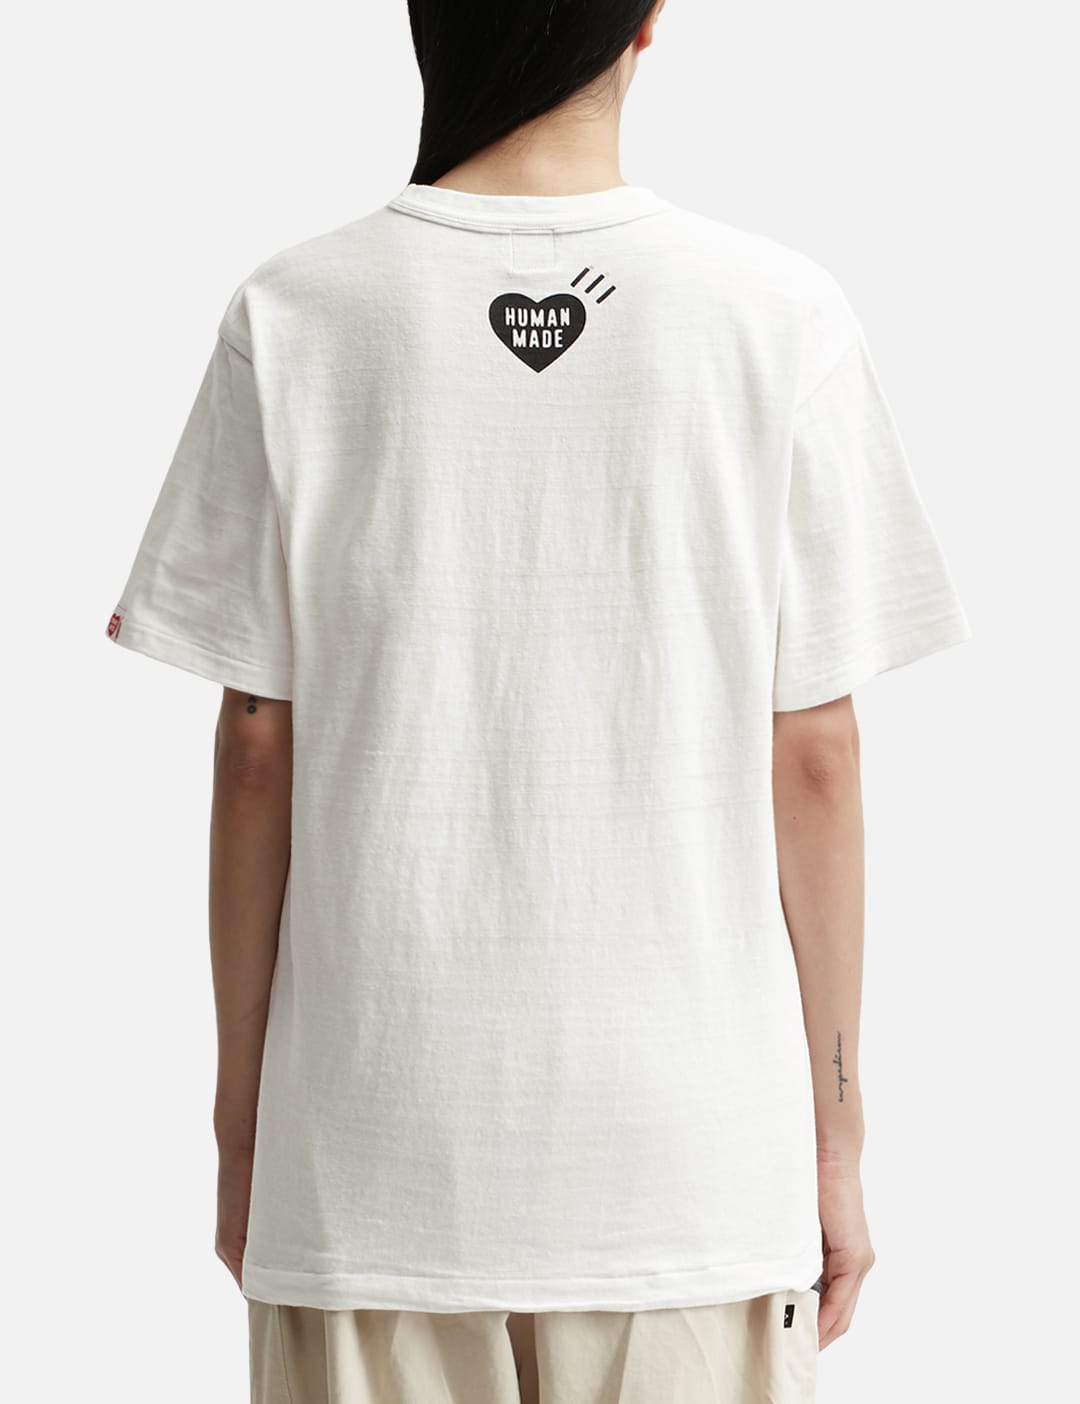 Human Made - GRAPHIC T-SHIRT #13 | HBX - Globally Curated Fashion ...